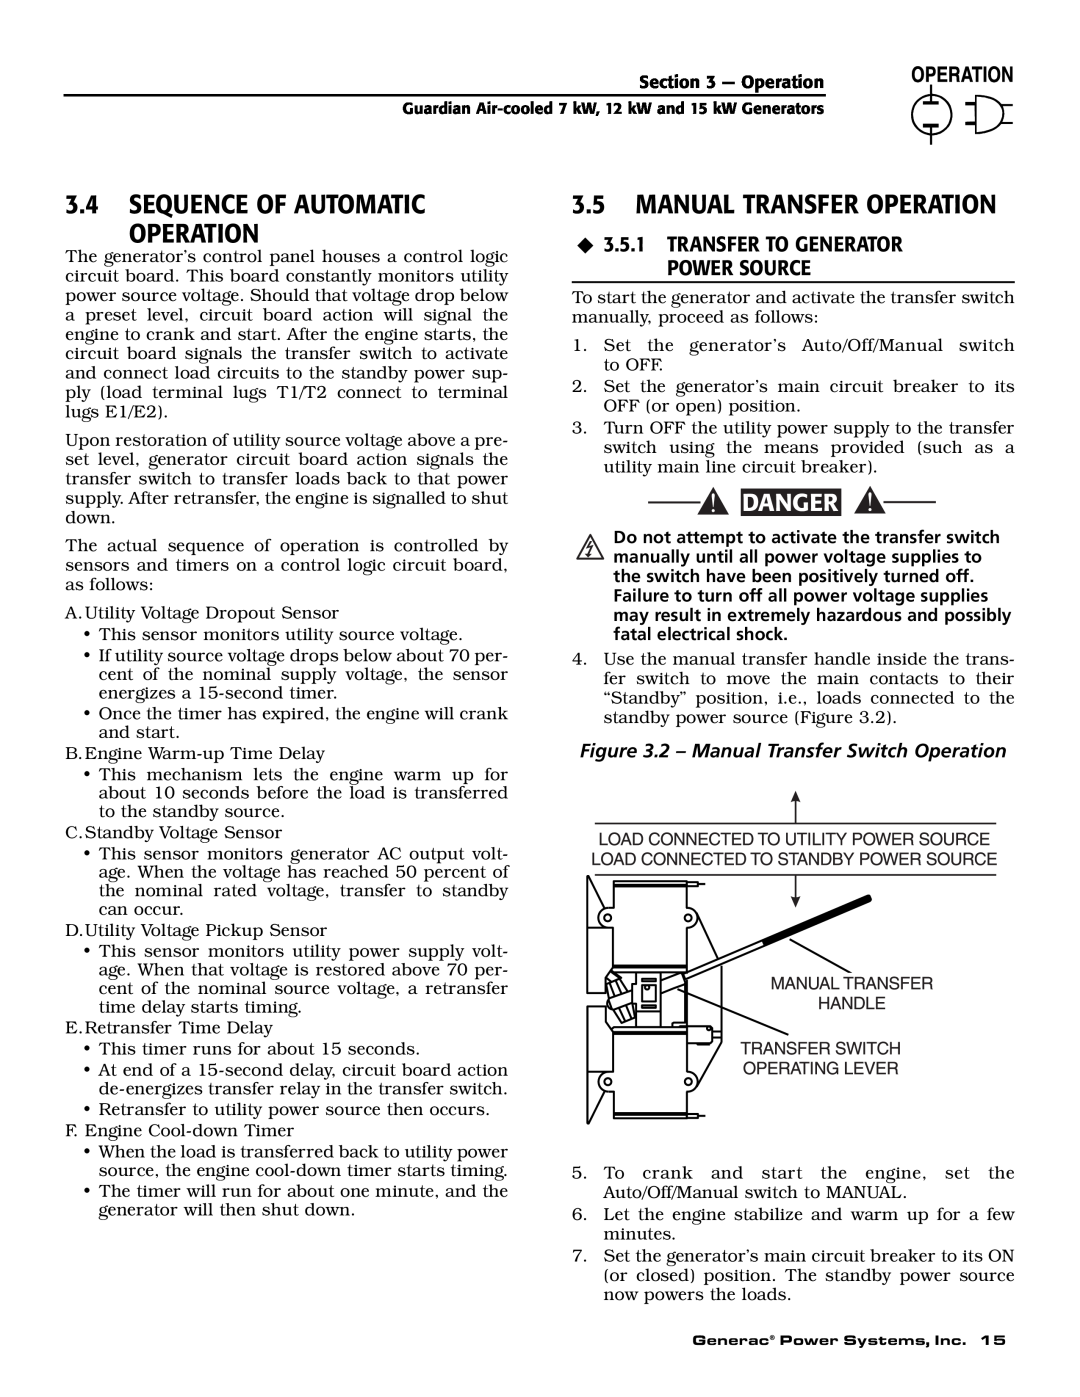 Generac Power Systems 04389-1, 04390-1, 04456-1 3.4SEQUENCE OF AUTOMATIC OPERATION, 3.5MANUAL TRANSFER OPERATION, Danger 